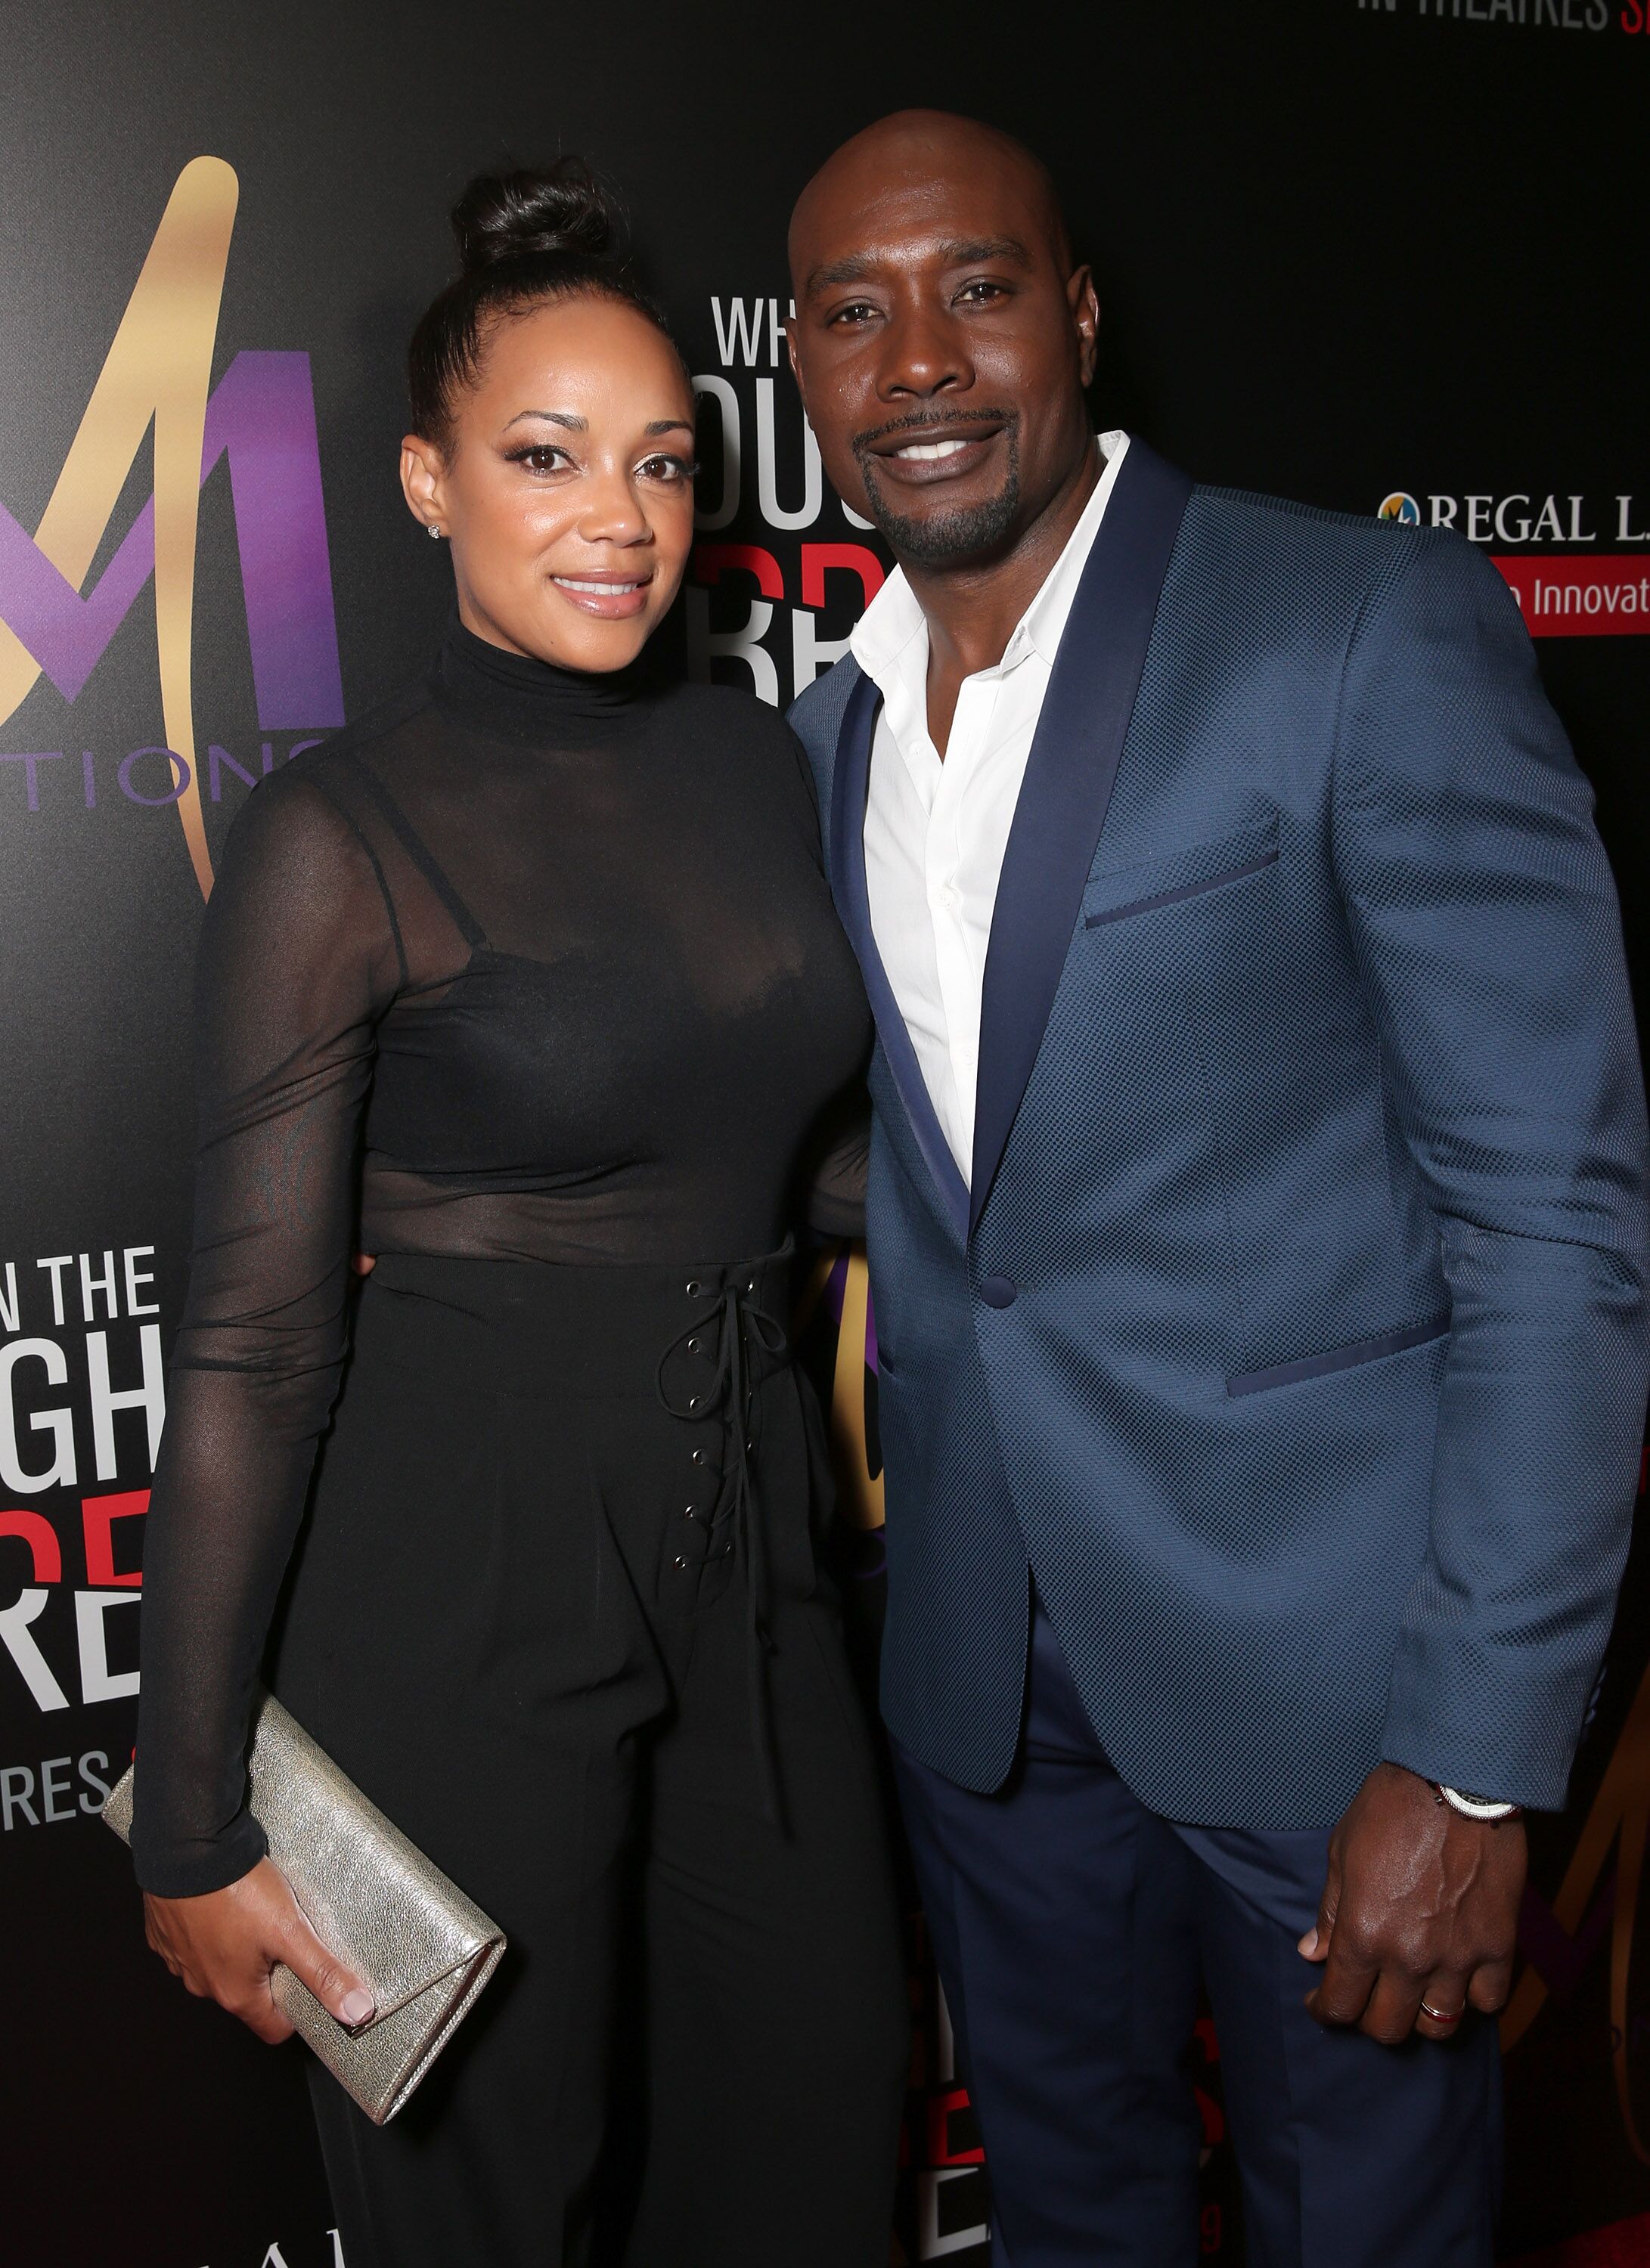 Morris Chestnut (right) and wife Pam Byse attend the Premiere Of Sony Pictures Releasing's "When The Bough Breaks" at Regal LA Live Stadium 14 on August 28, 2016 in Los Angeles, California. | Photo: Getty Images